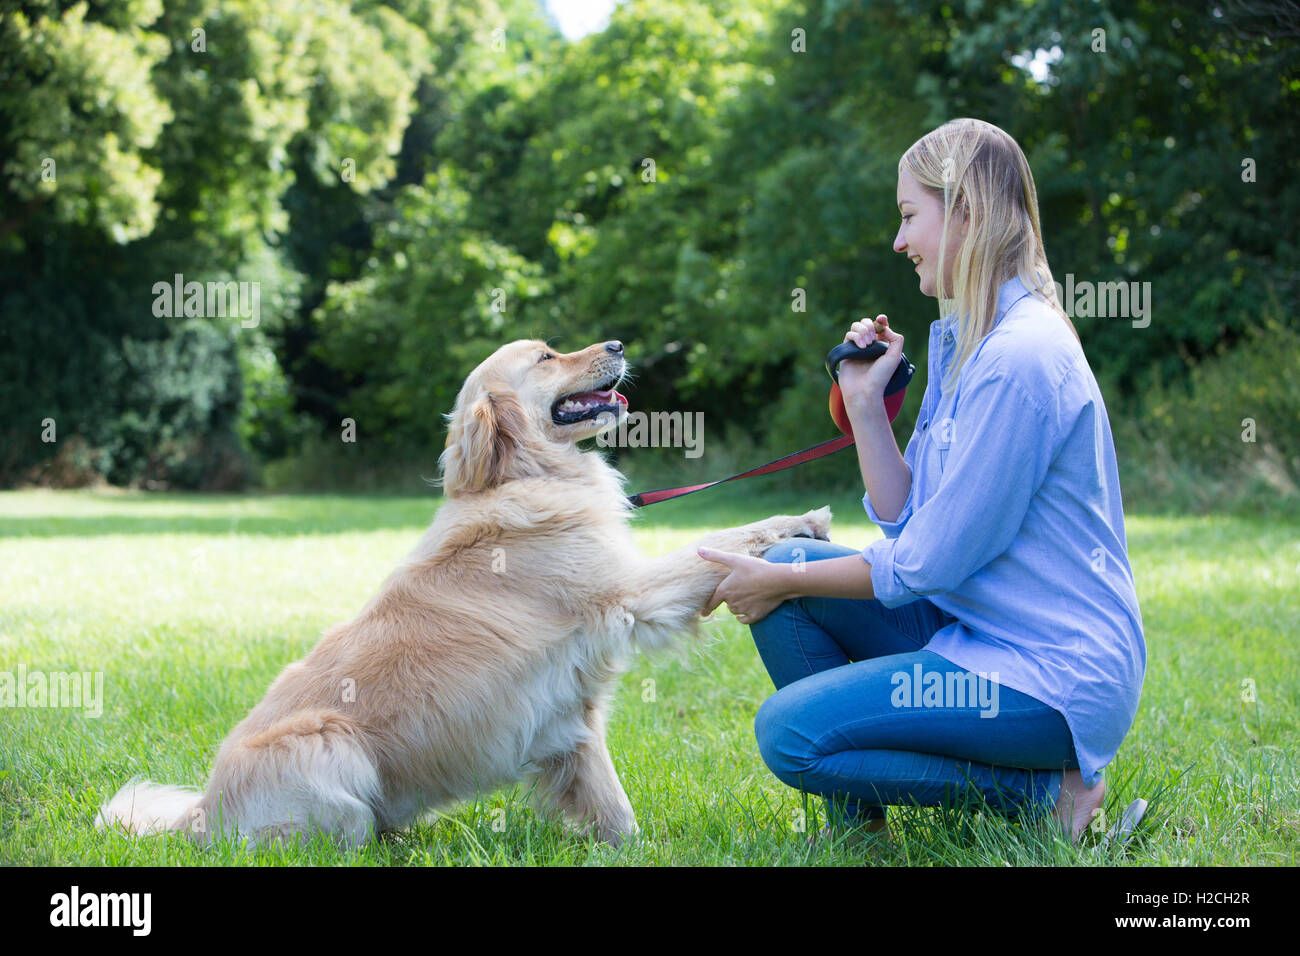 Woman Taking Golden Retriever For Walk In Countryside Stock Photo